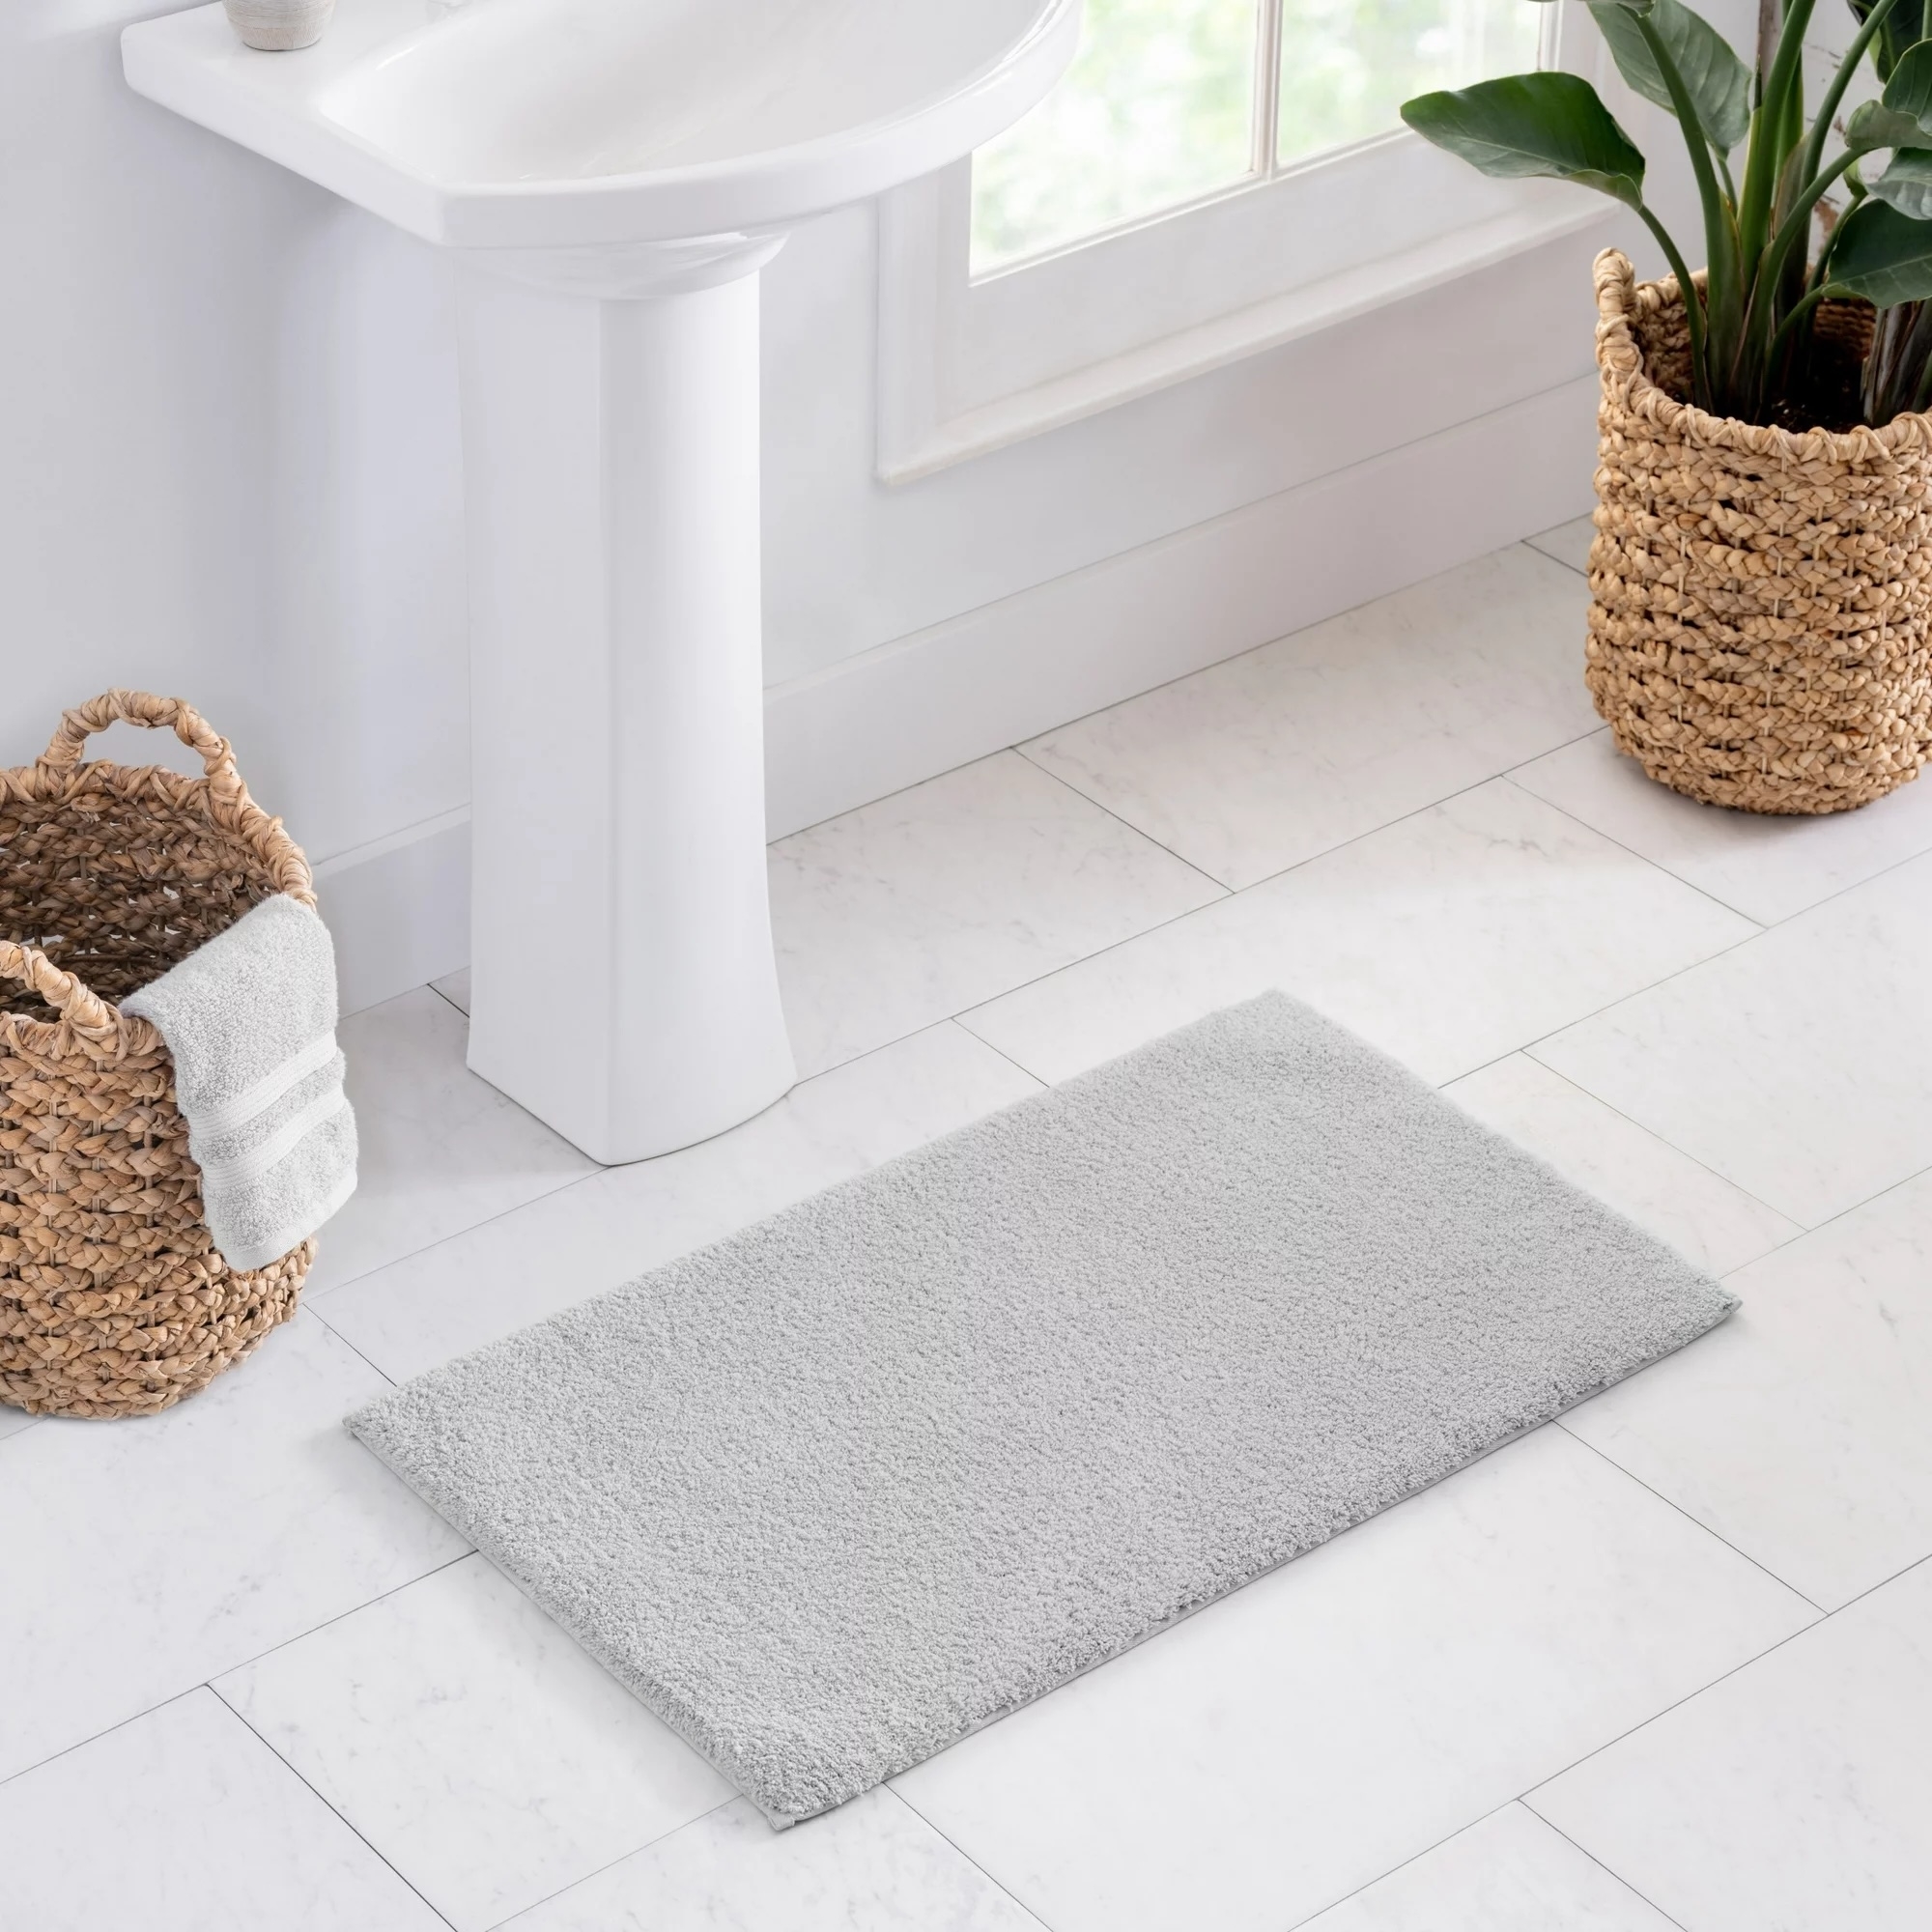 gray bath mat in front of the sink